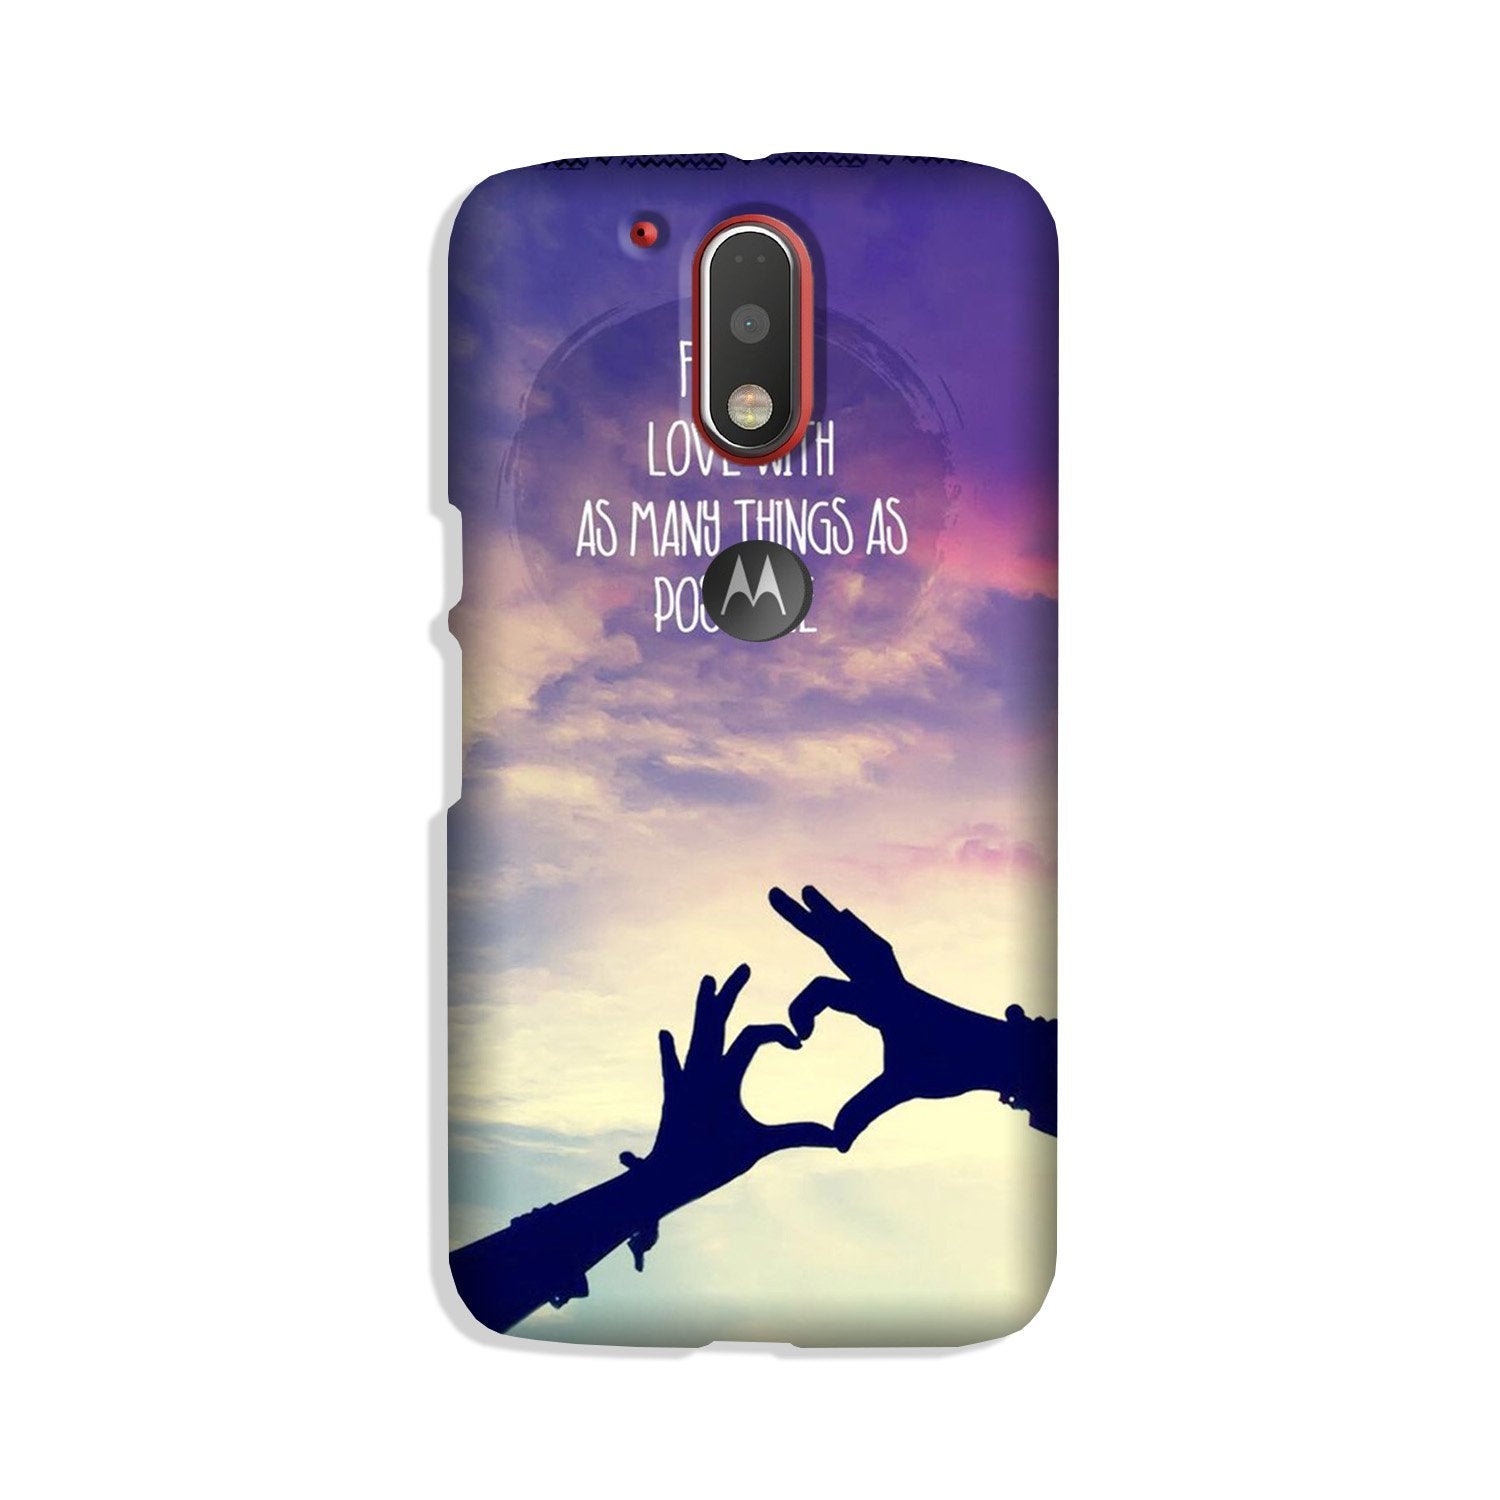 Fall in love Case for Moto G4 Plus